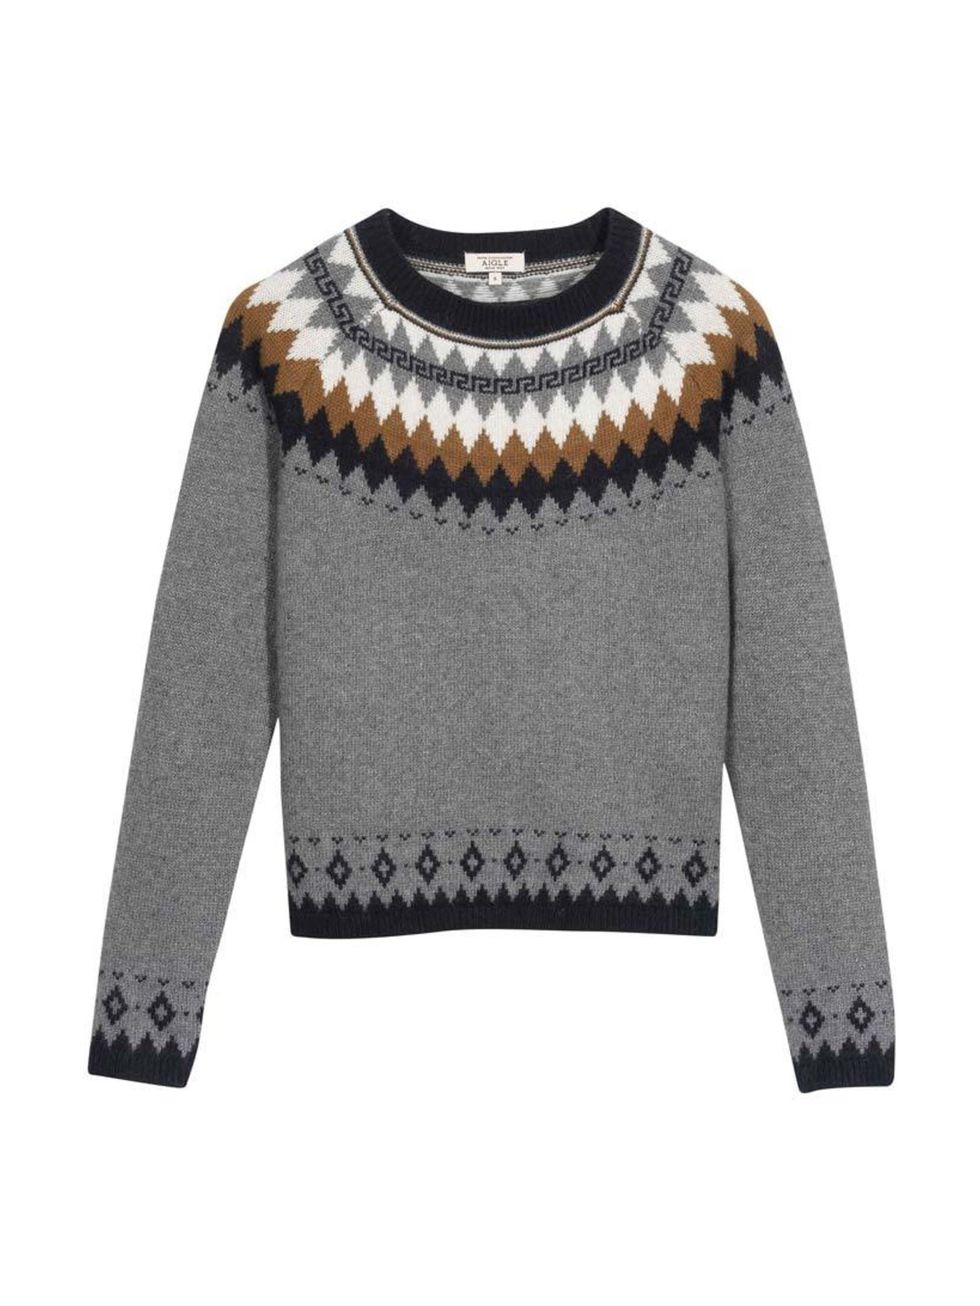 <p>Just the right amount of novelty winter knit. Just add mulled wine. </p>

<p><a href="http://www.aigle.com/en_uk/woolworld-17377.html" target="_blank">Aigle</a> jumper, £90</p>